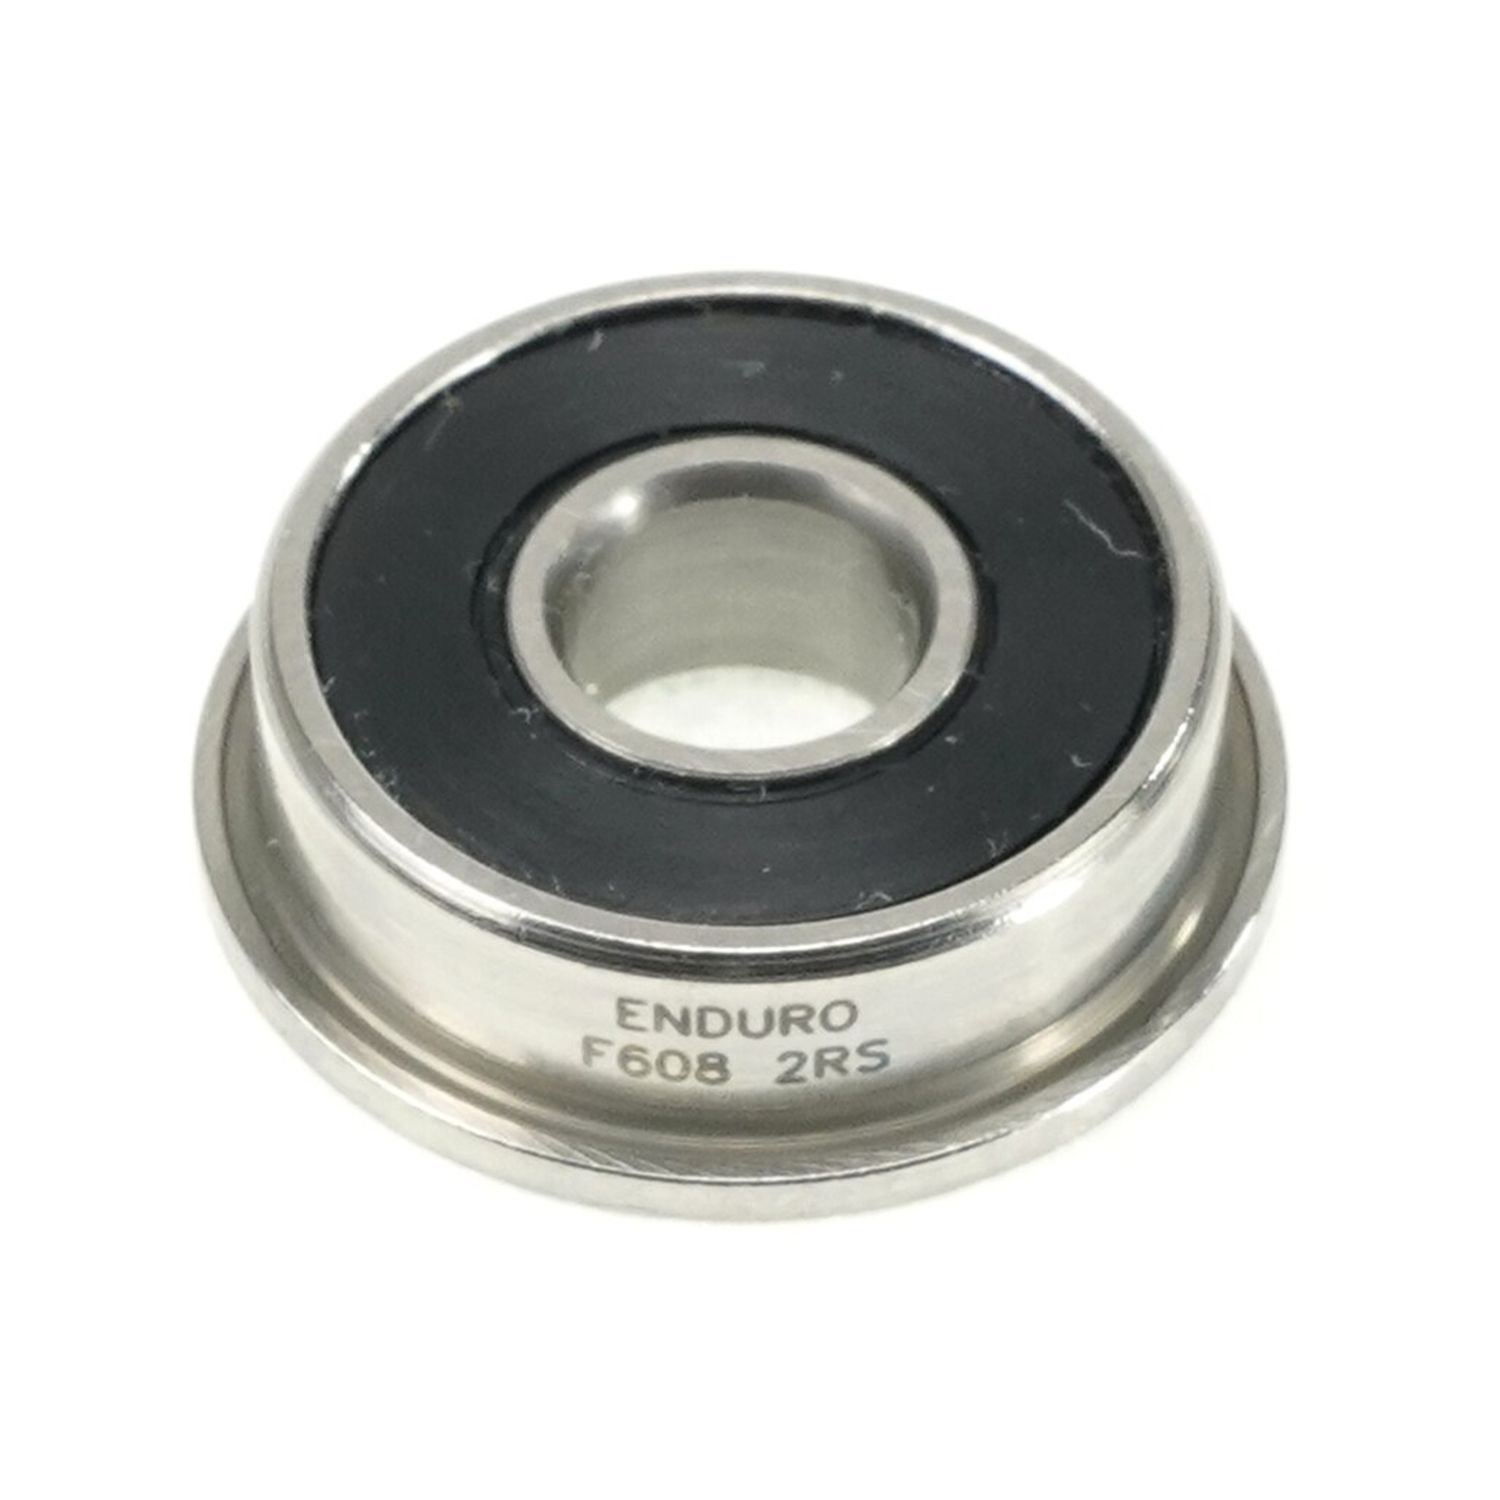 Bearings | Components and Peripherals | Categories | Now Company